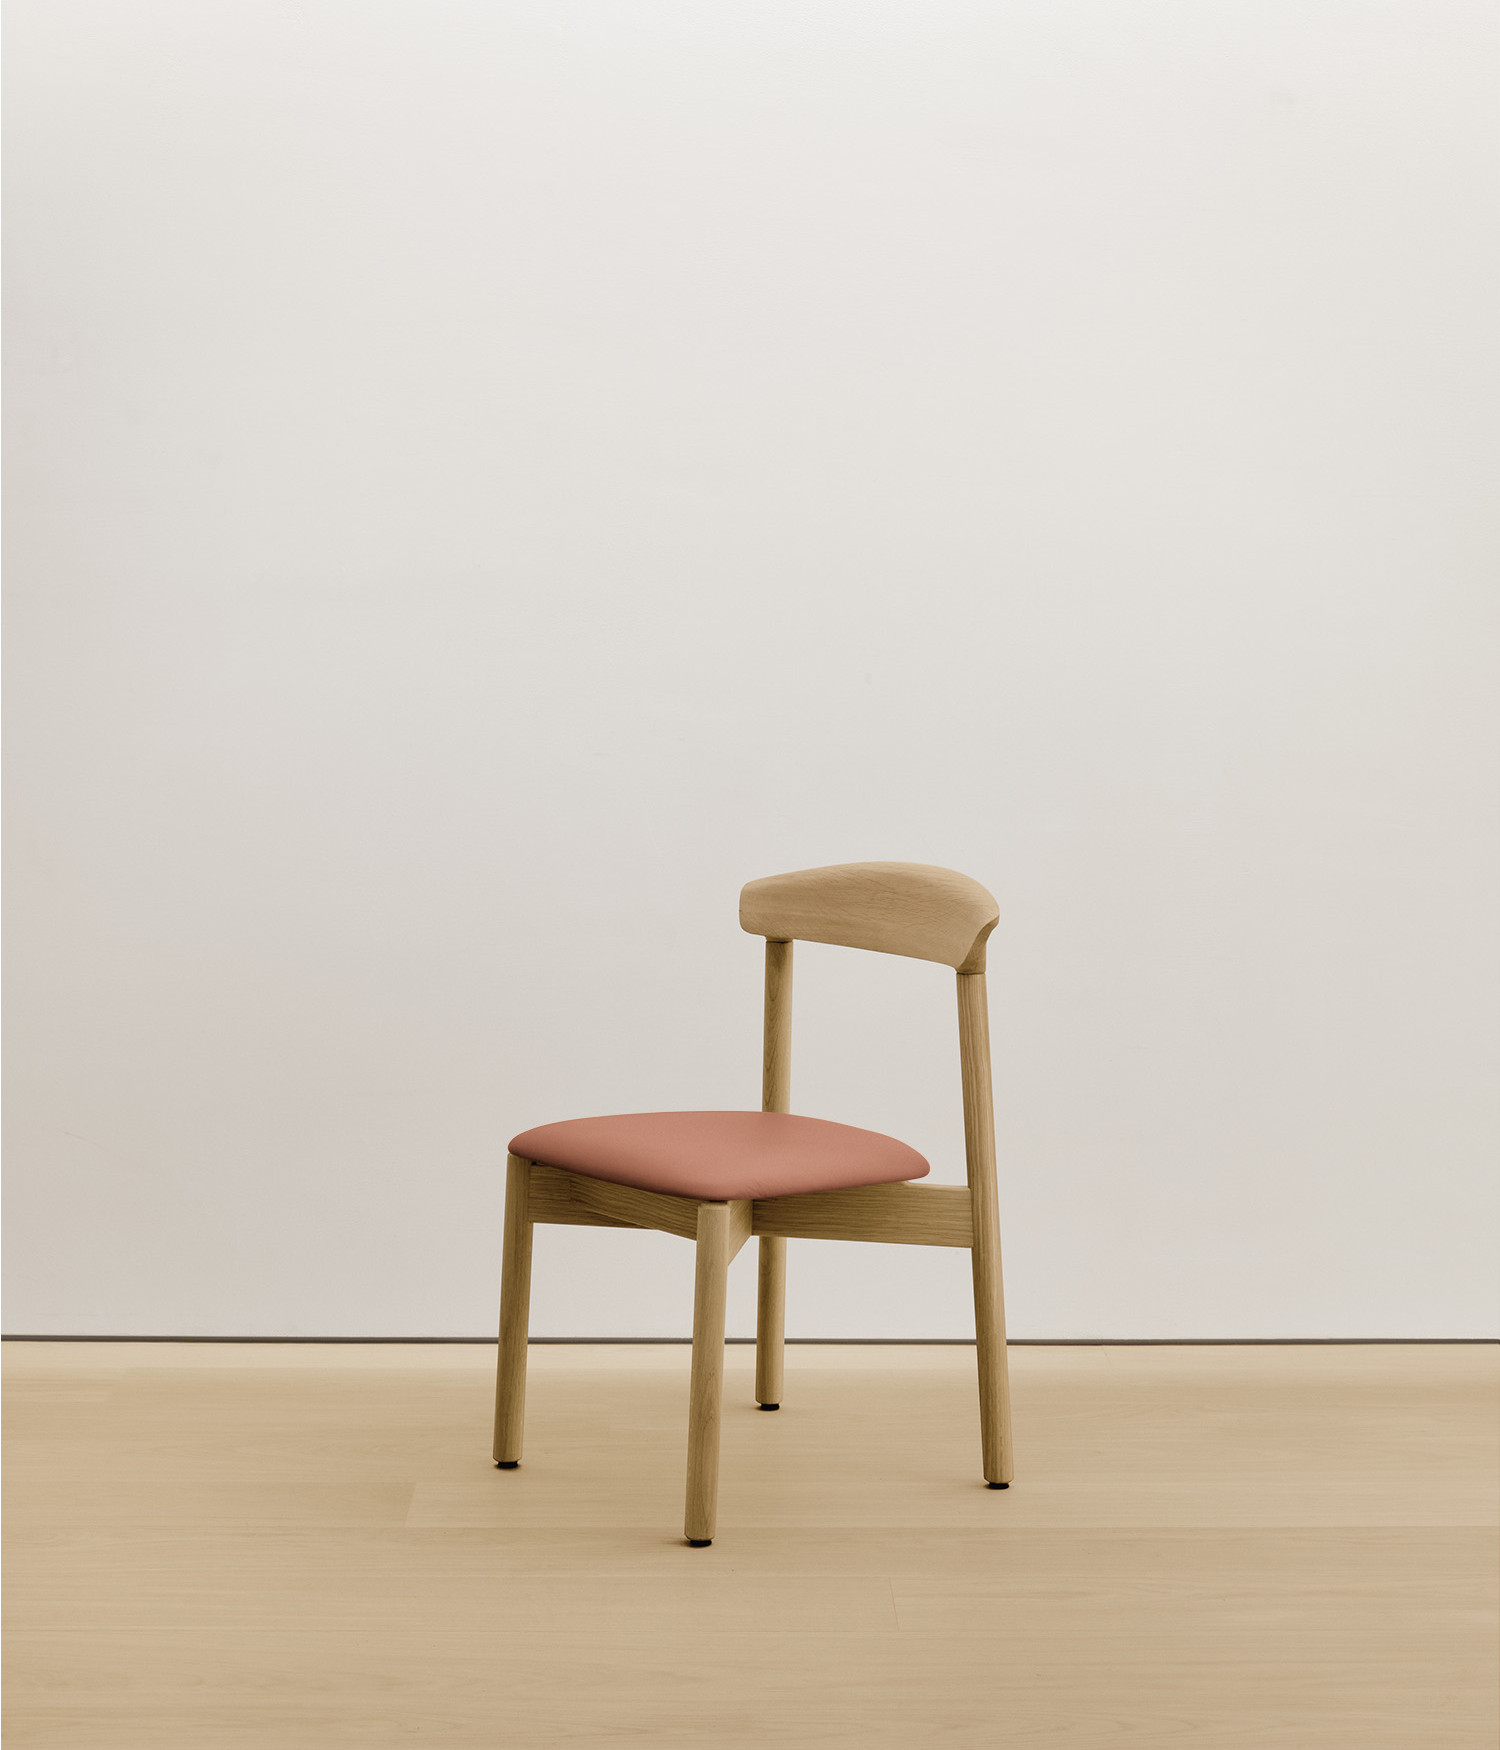  white-oak chair with  color upholstered seat